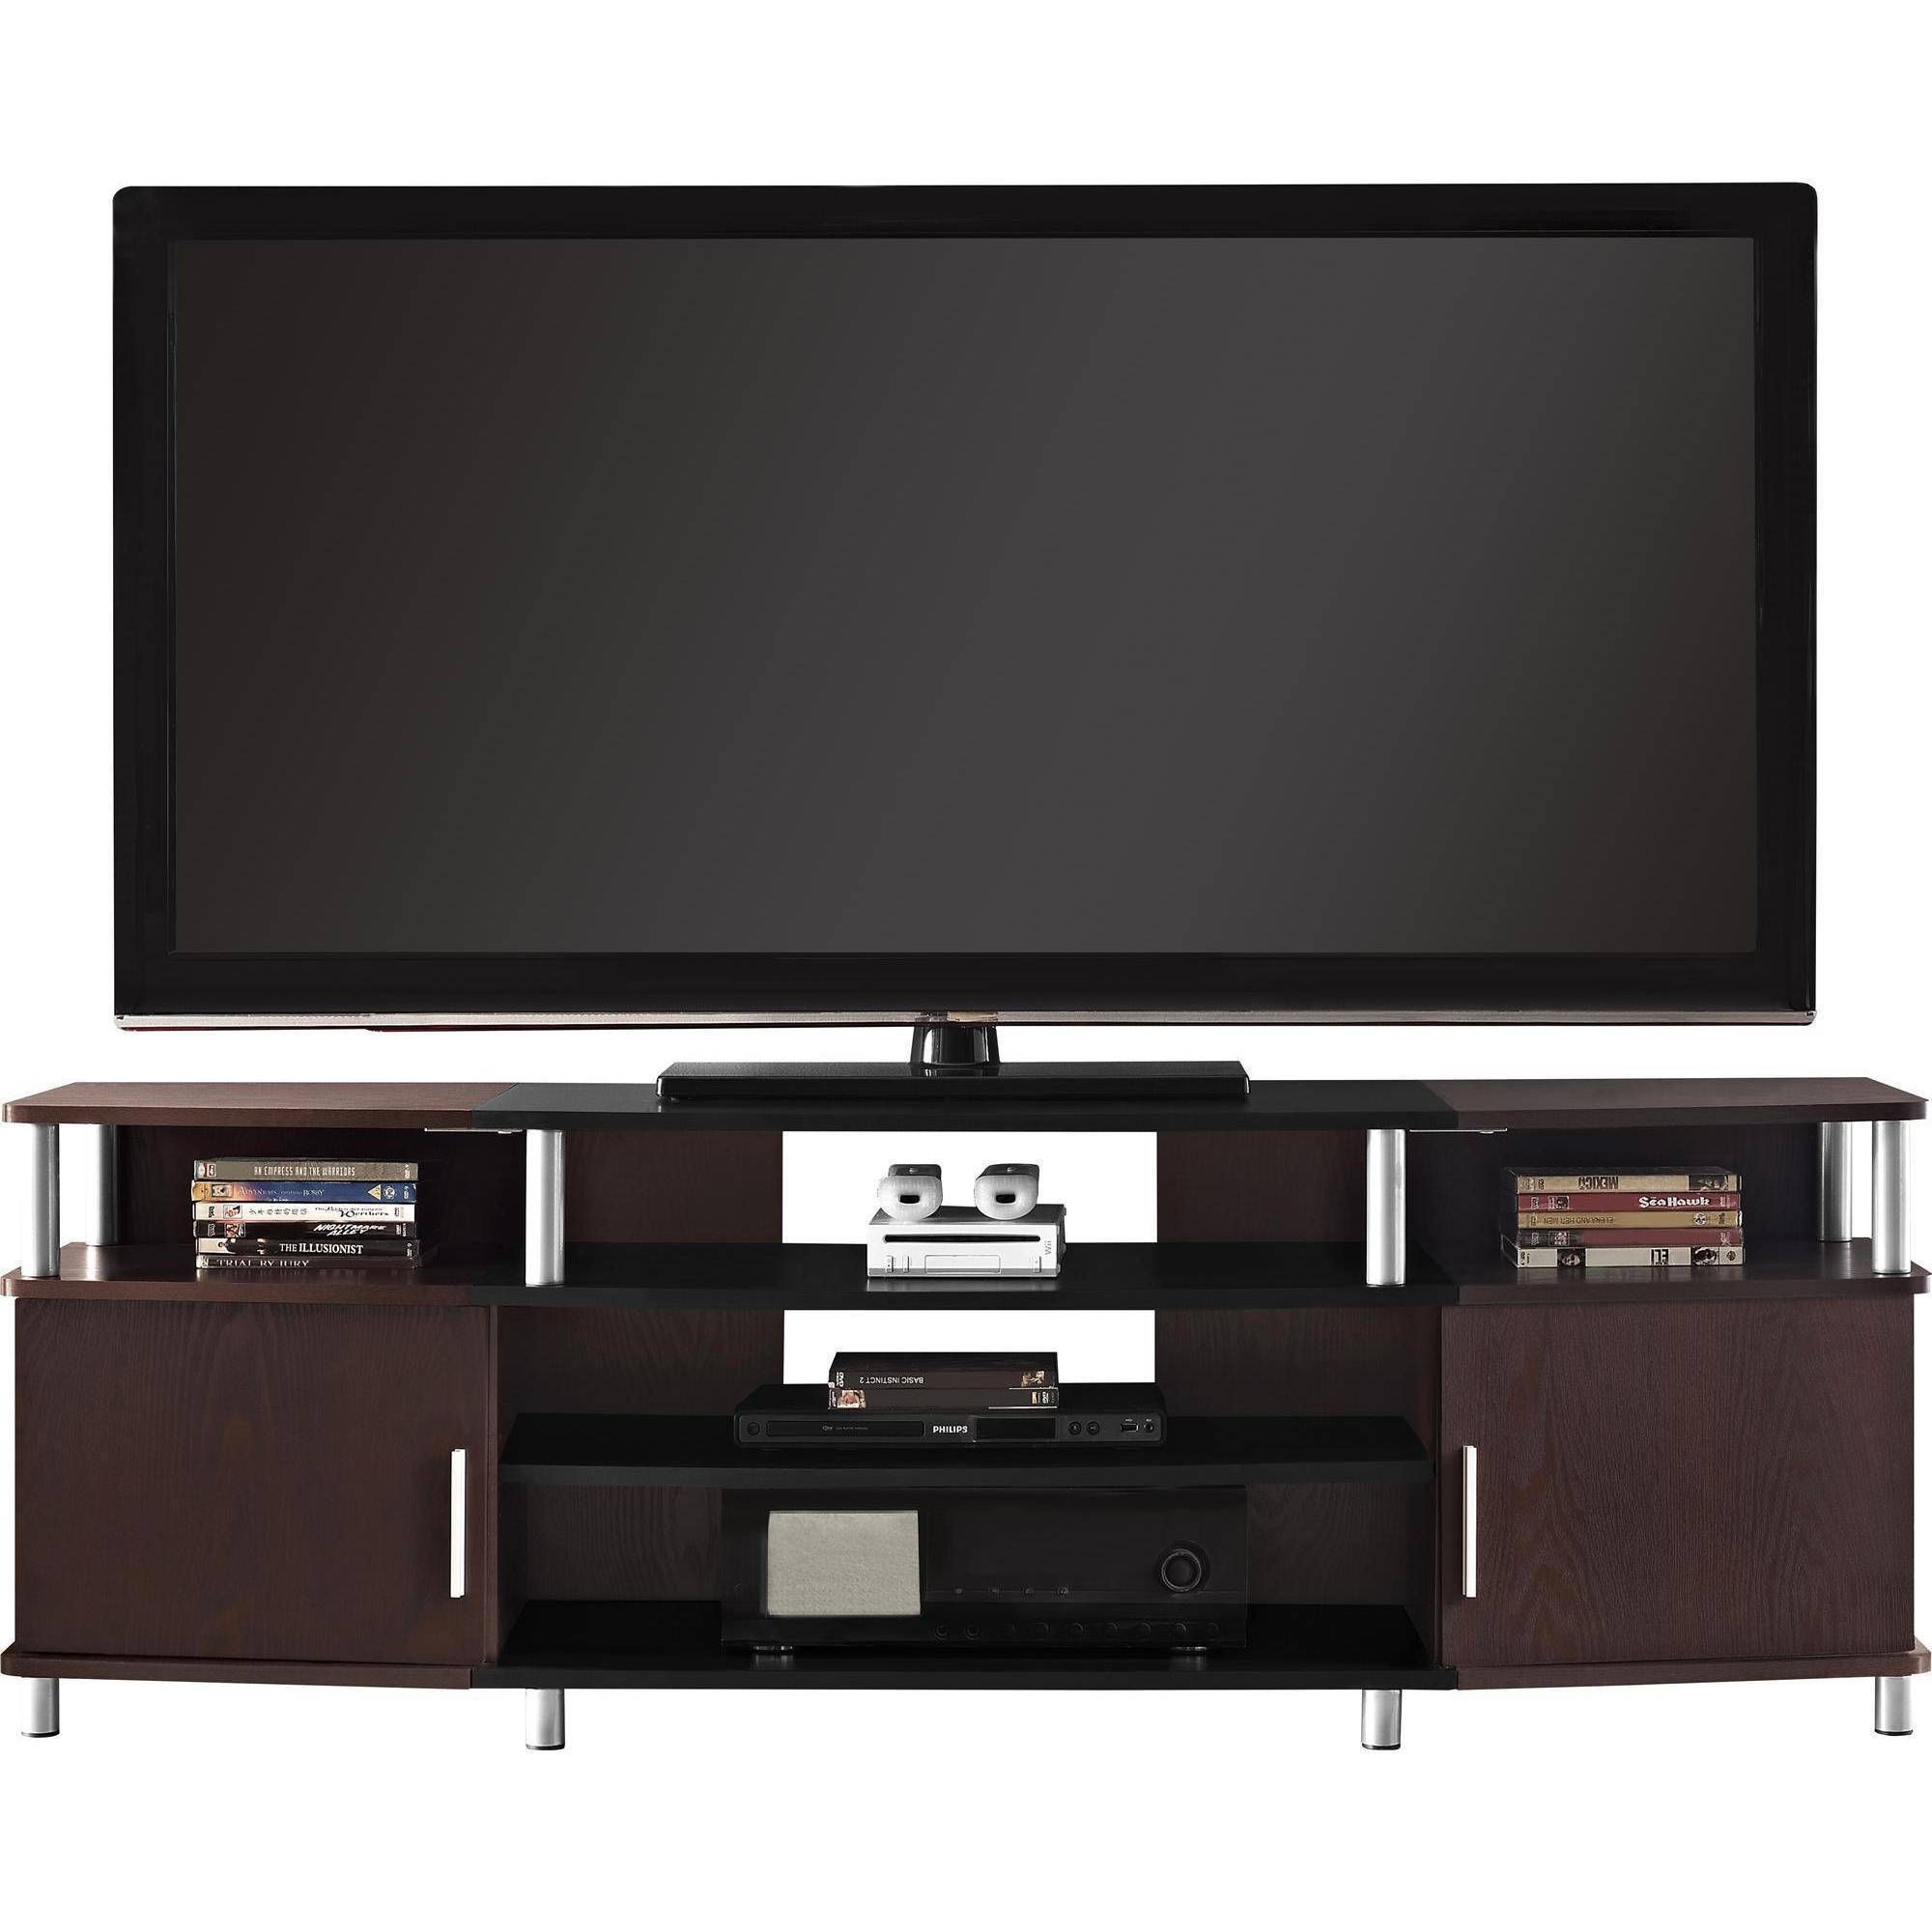 Ameriwood Home Carson Tv Stand For Tvs Up To 70" Wide, Cherry | Ebay With Wide Tv Cabinets (View 8 of 15)